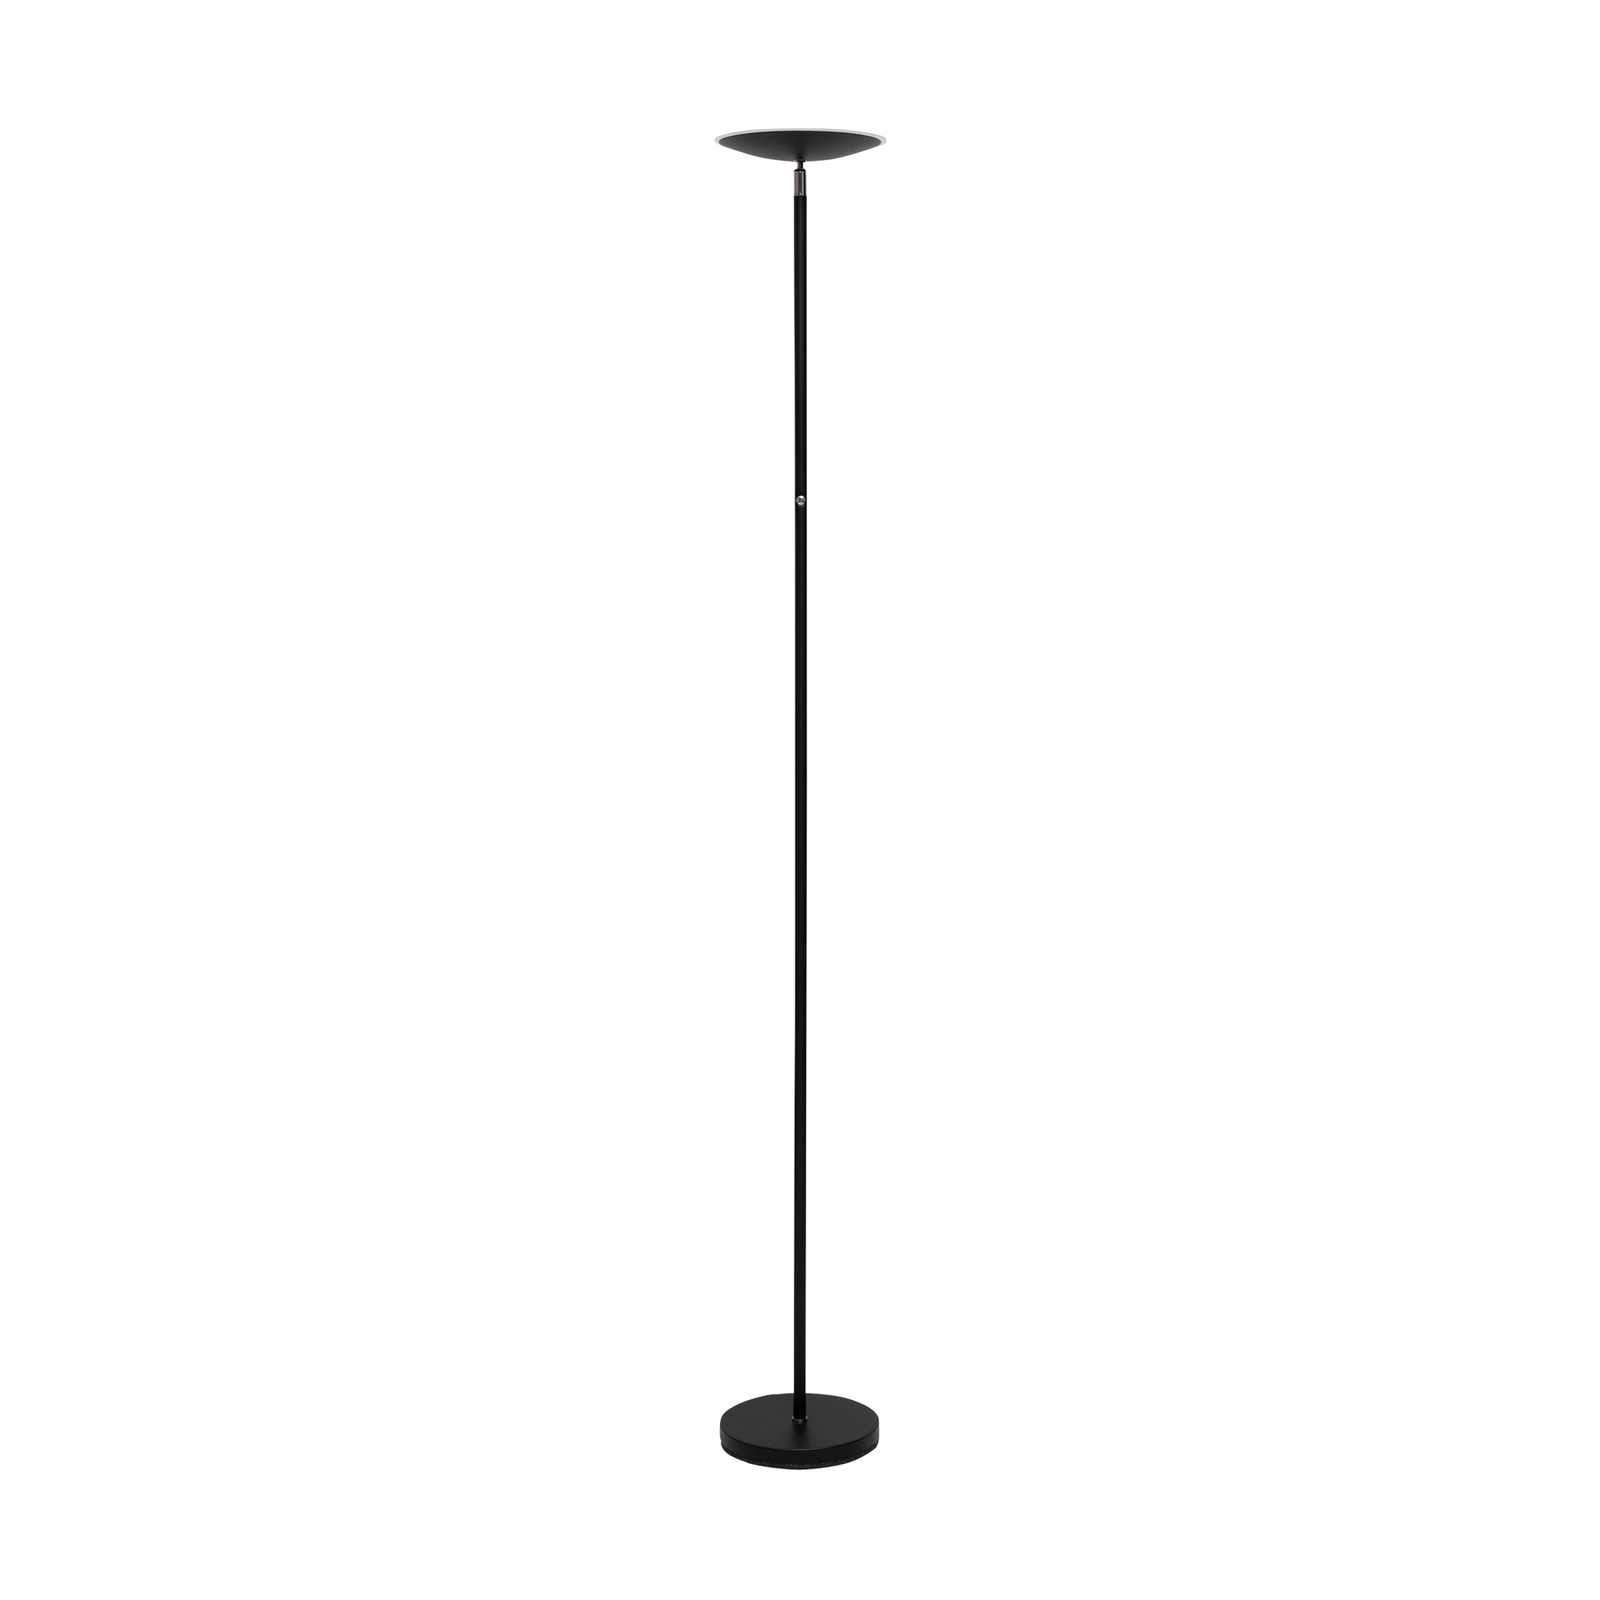 Lampadaire LED MAULsphere, dimmable, noir